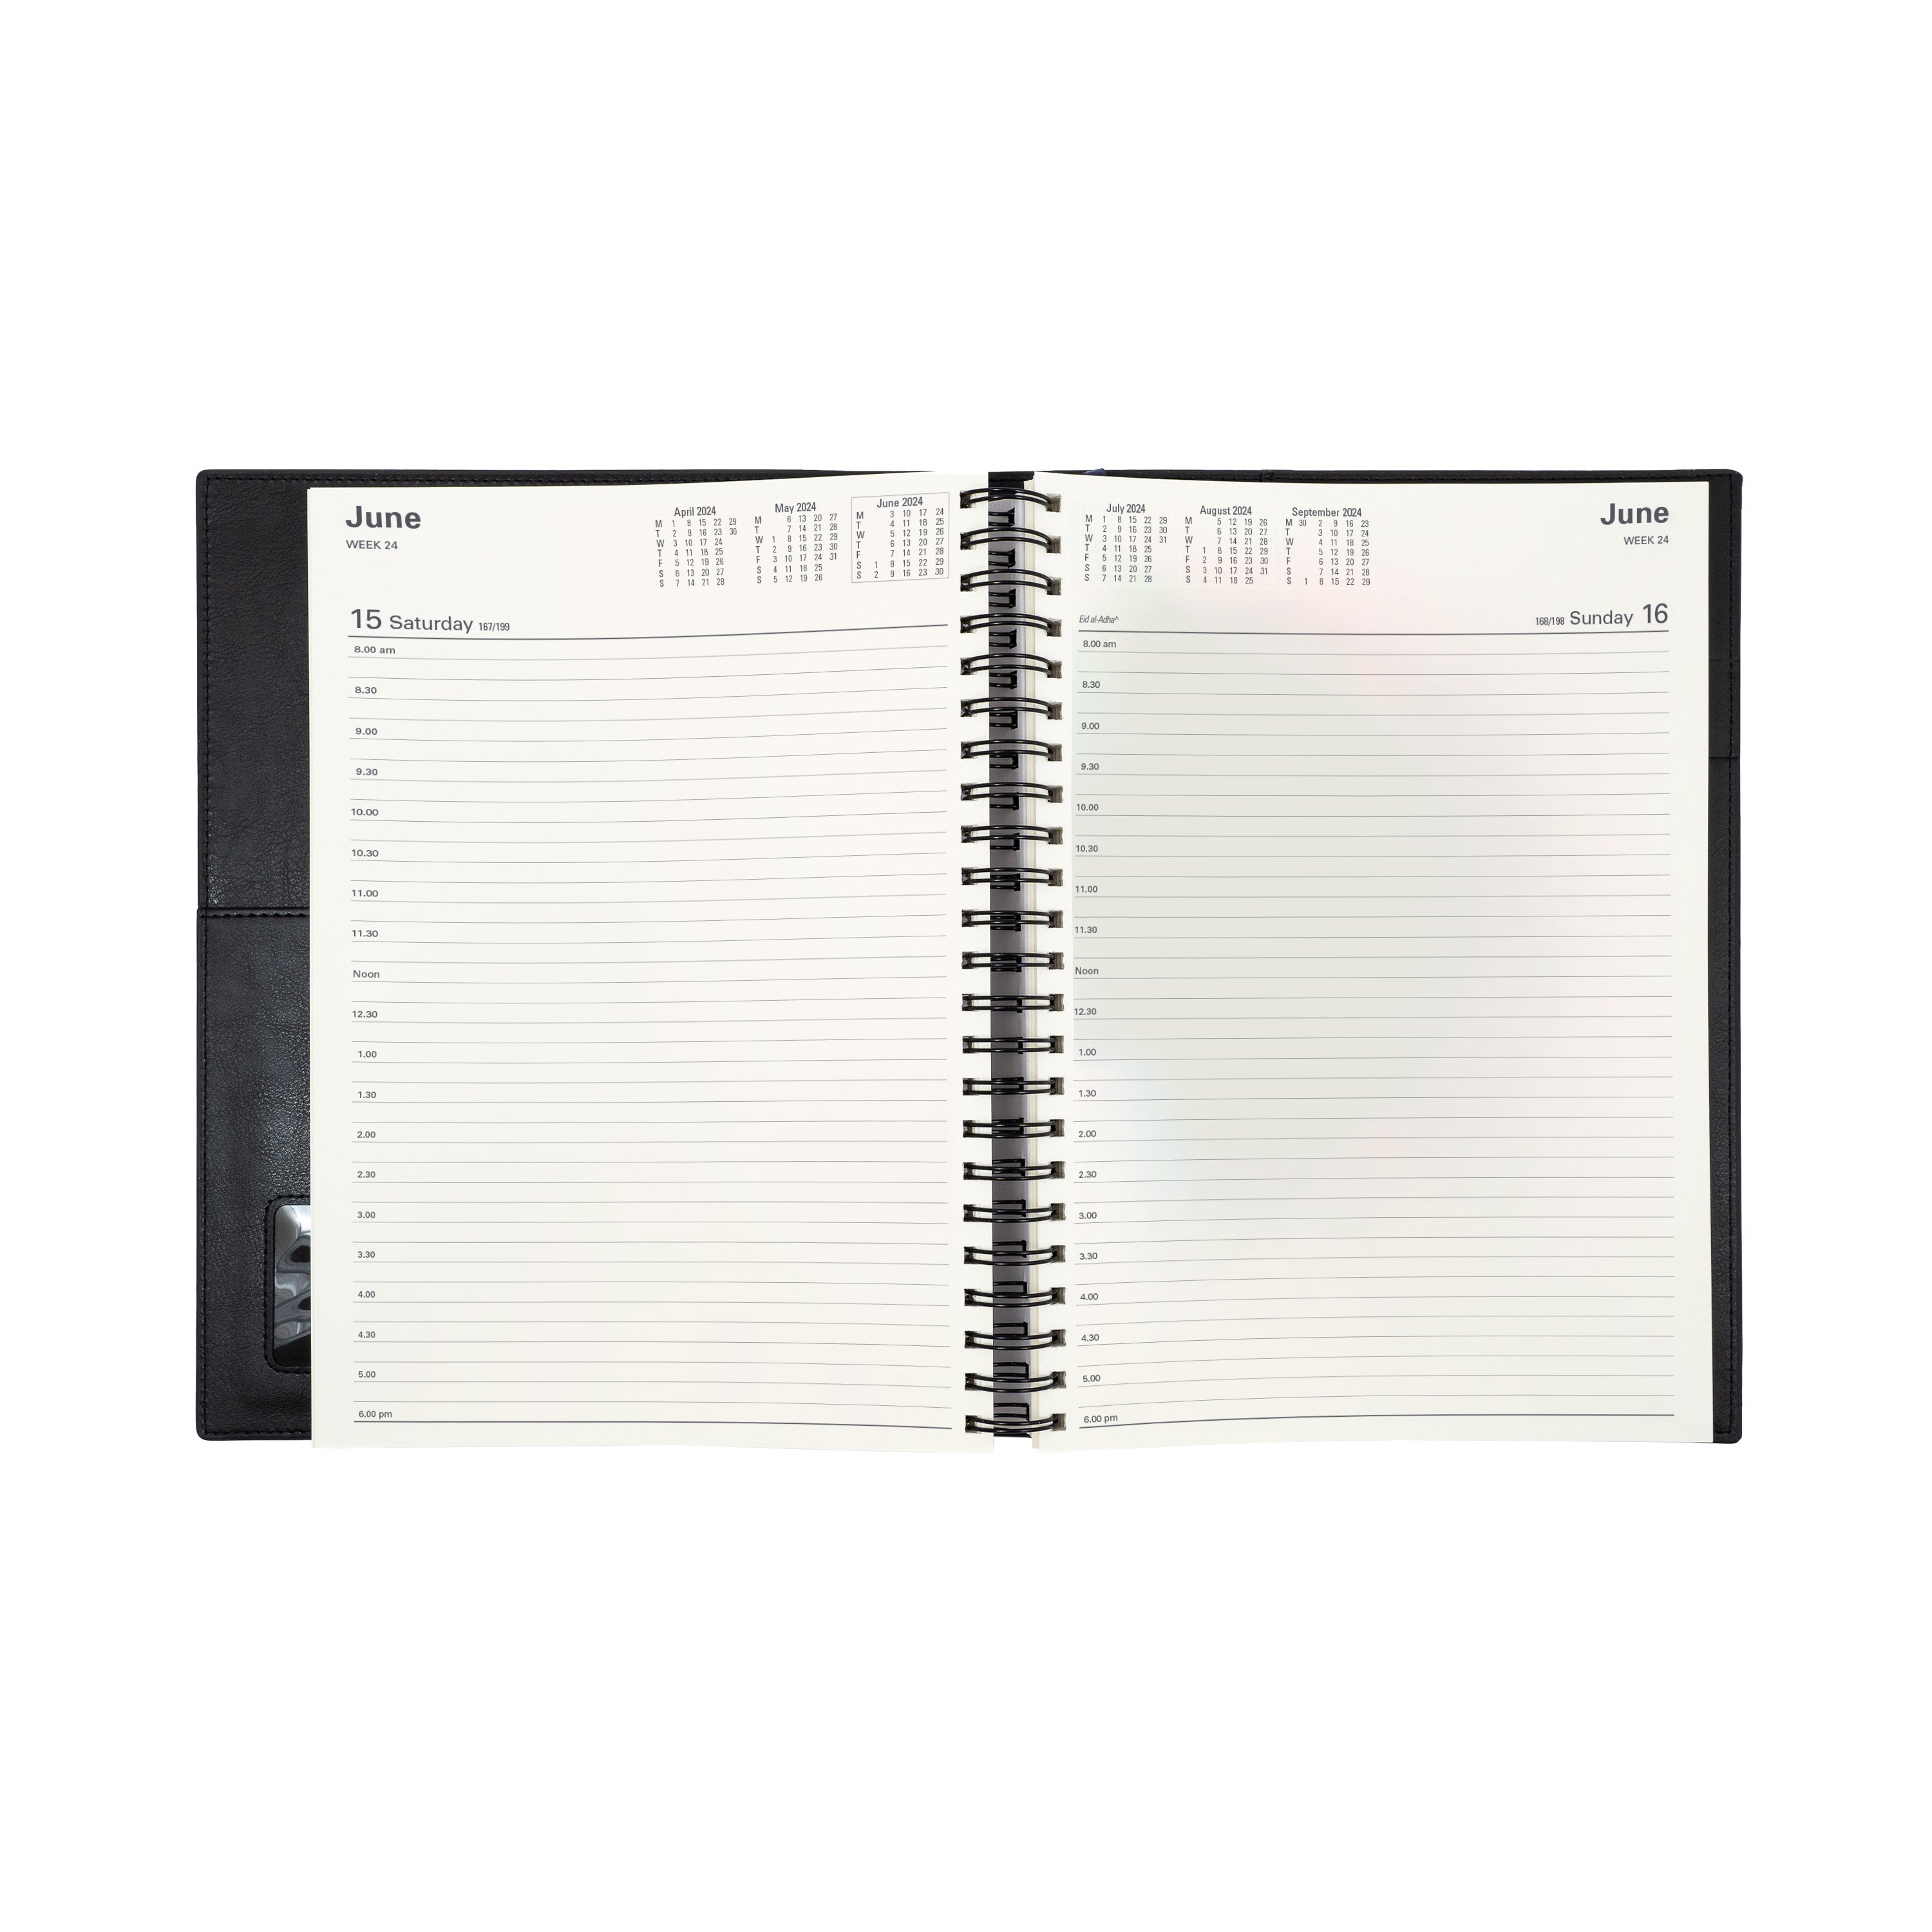 Collins Vanessa 2024 Diary - Day to a Page View (8am - 6pm, 1/2 hourly)